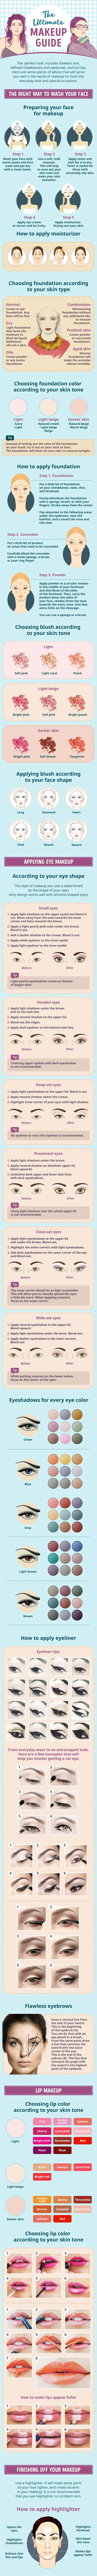 Best Makeup Tutorials for Teens -The Ultimate Makeup Guide You Can’t Live Without - Easy Makeup Ideas for Beginners - Step by Step Tutorials for Foundation, Eye Shadow, Lipstick, Cheeks, Contour, Eyebrows and Eyes - Awesome Makeup Hacks and Tips for Simple DIY Beauty - Day and Evening Looks http://diyprojectsforteens.com/makeup-tutorials-teens 